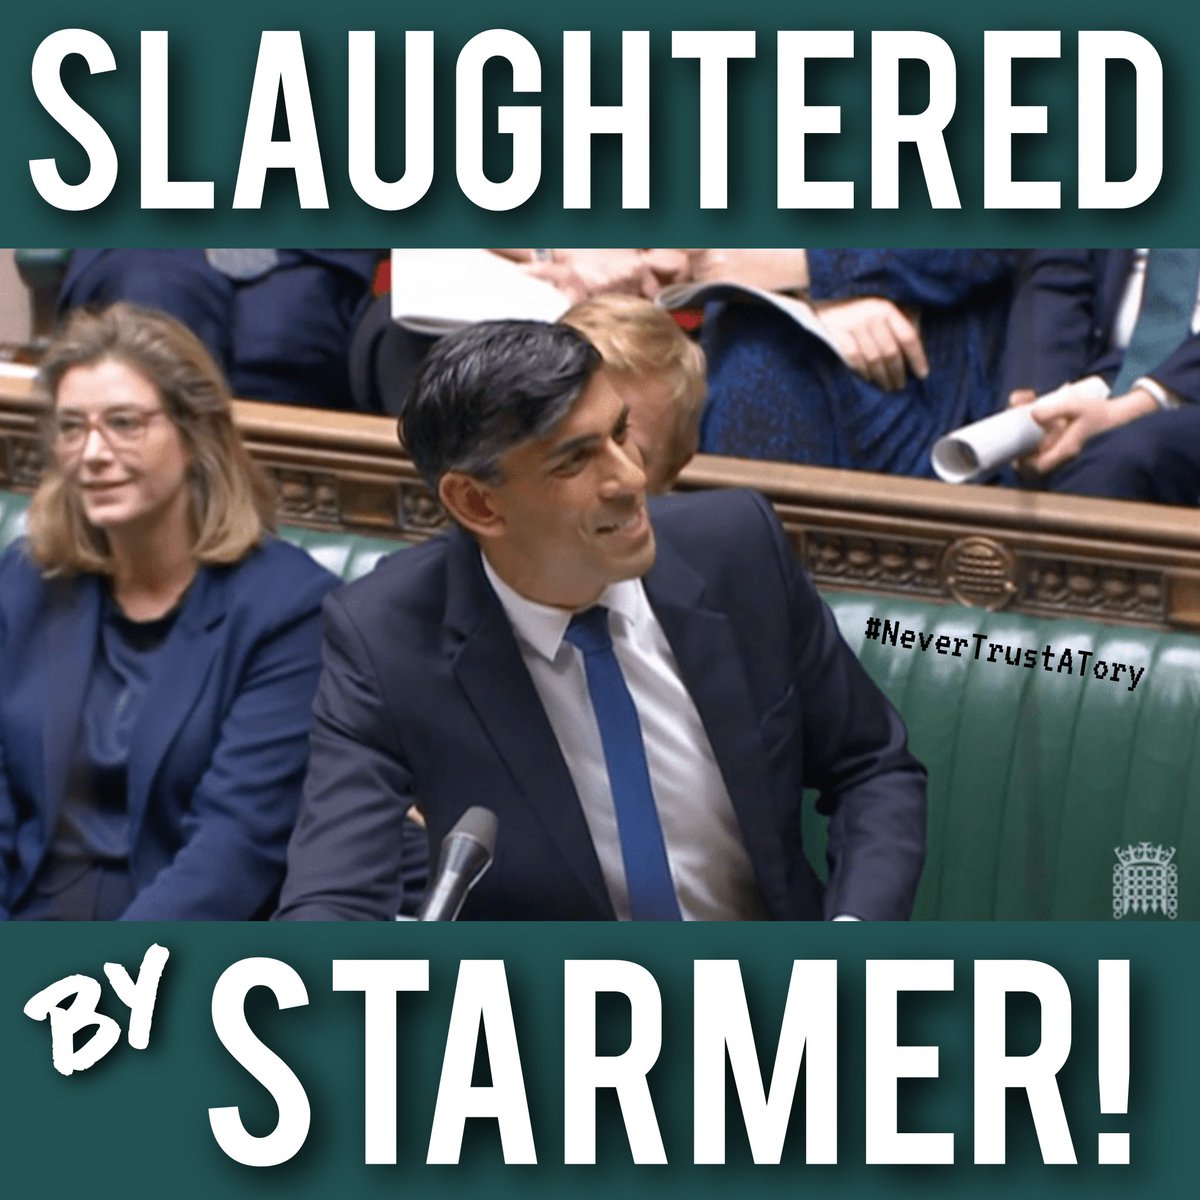 🚨 Week, after week, after week, this pathetic little weasel @RishiSunak gets his arse handed to him on a plate by @Keir_Starmer. 

#NeverTrustATory #ToryChaos #ToryGaslighting #ToryCorruption 
#ToriesDestroyingOurCountry #GeneralElectionN0W #PMQs